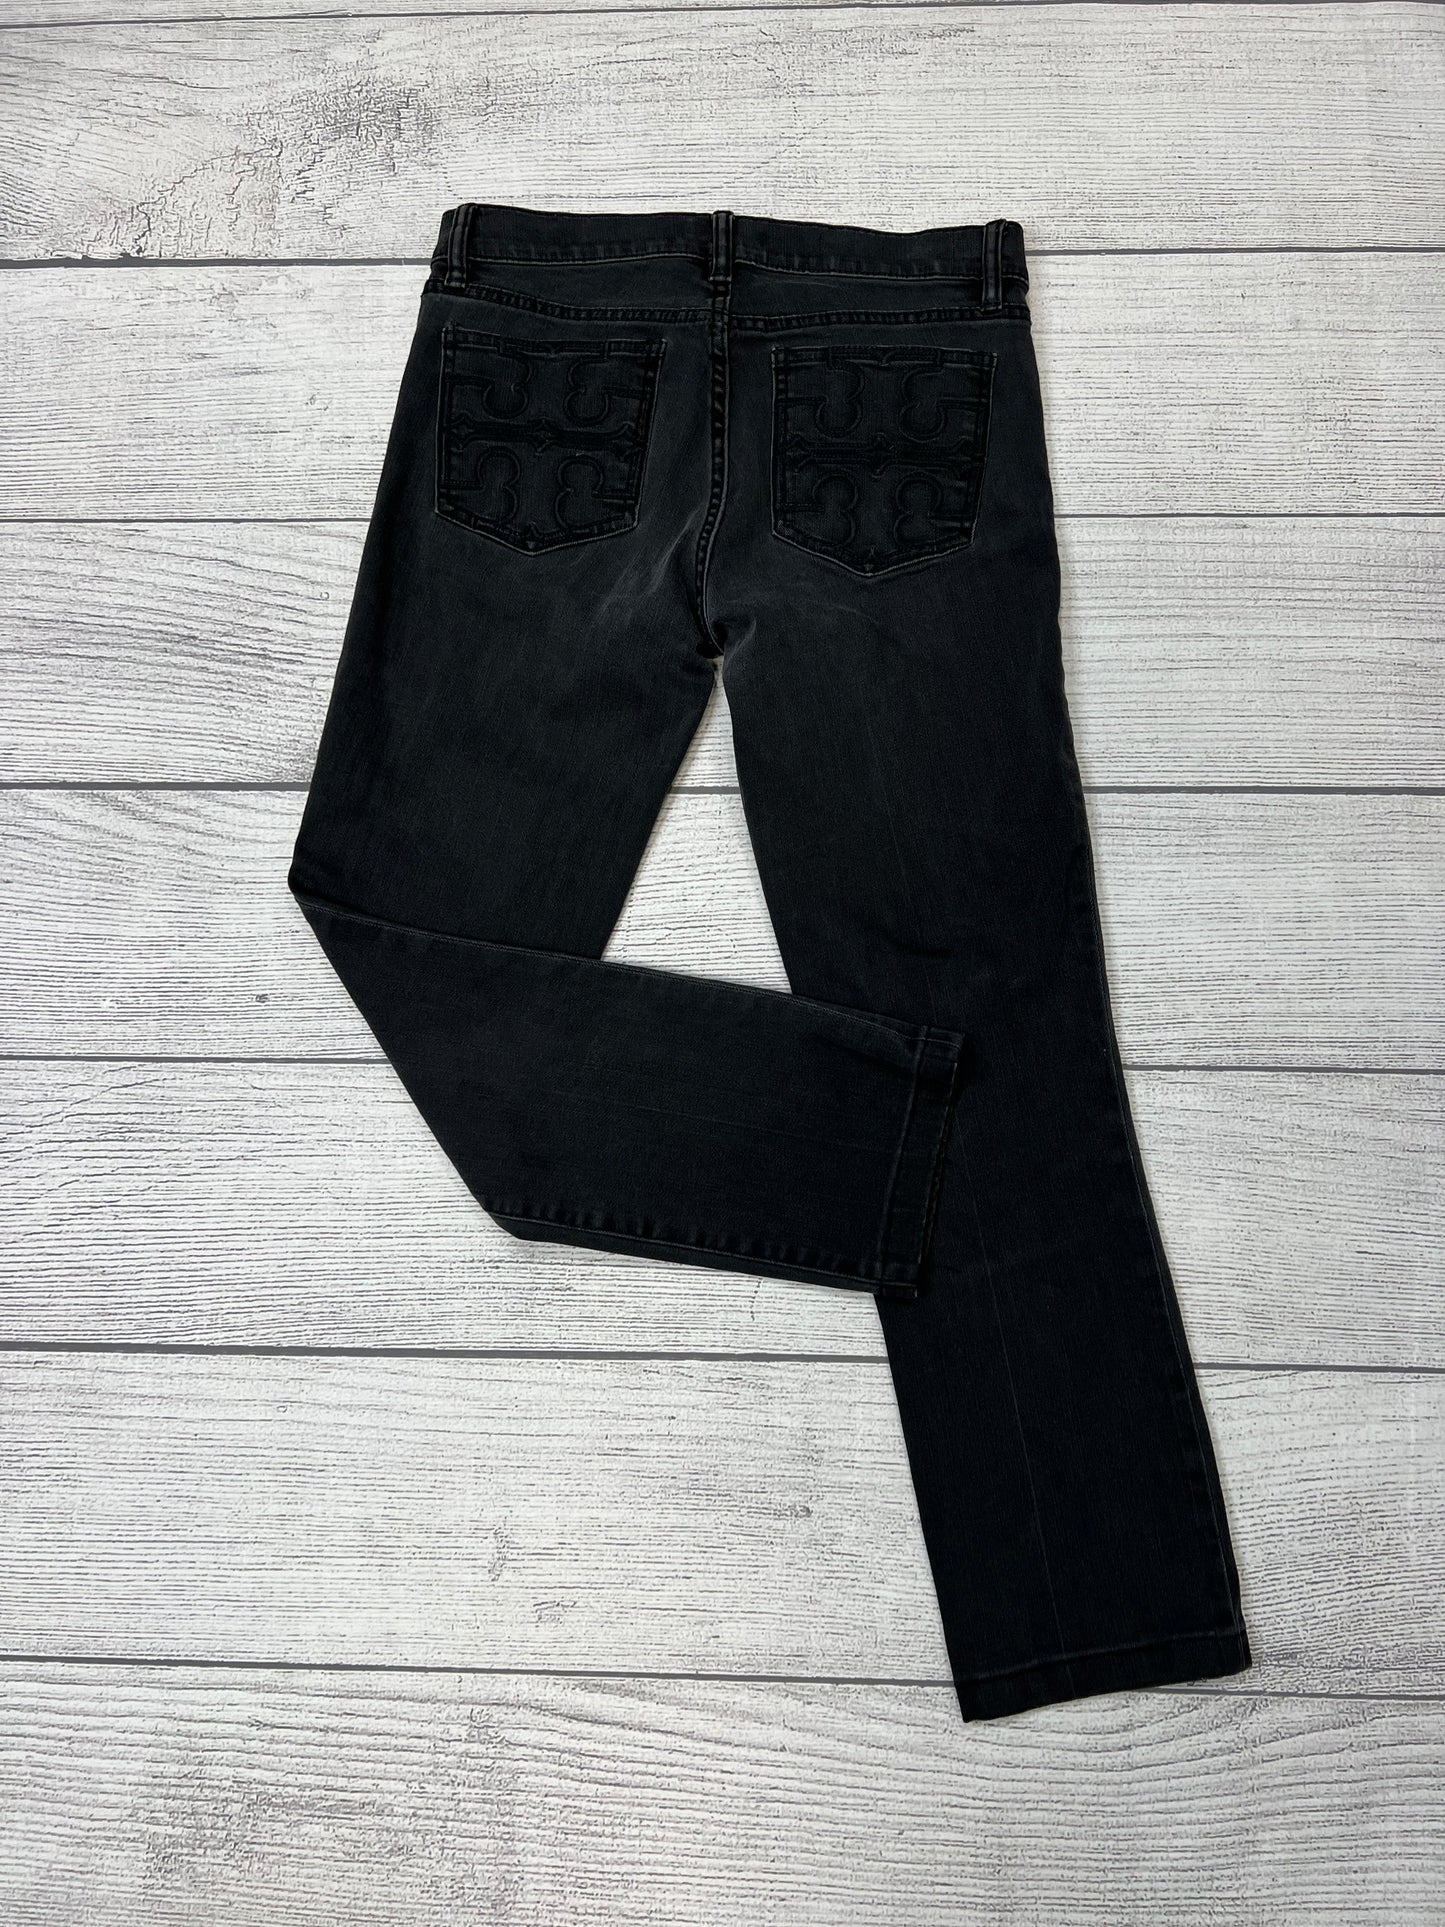 Jeans Designer By Tory Burch  Size: 6